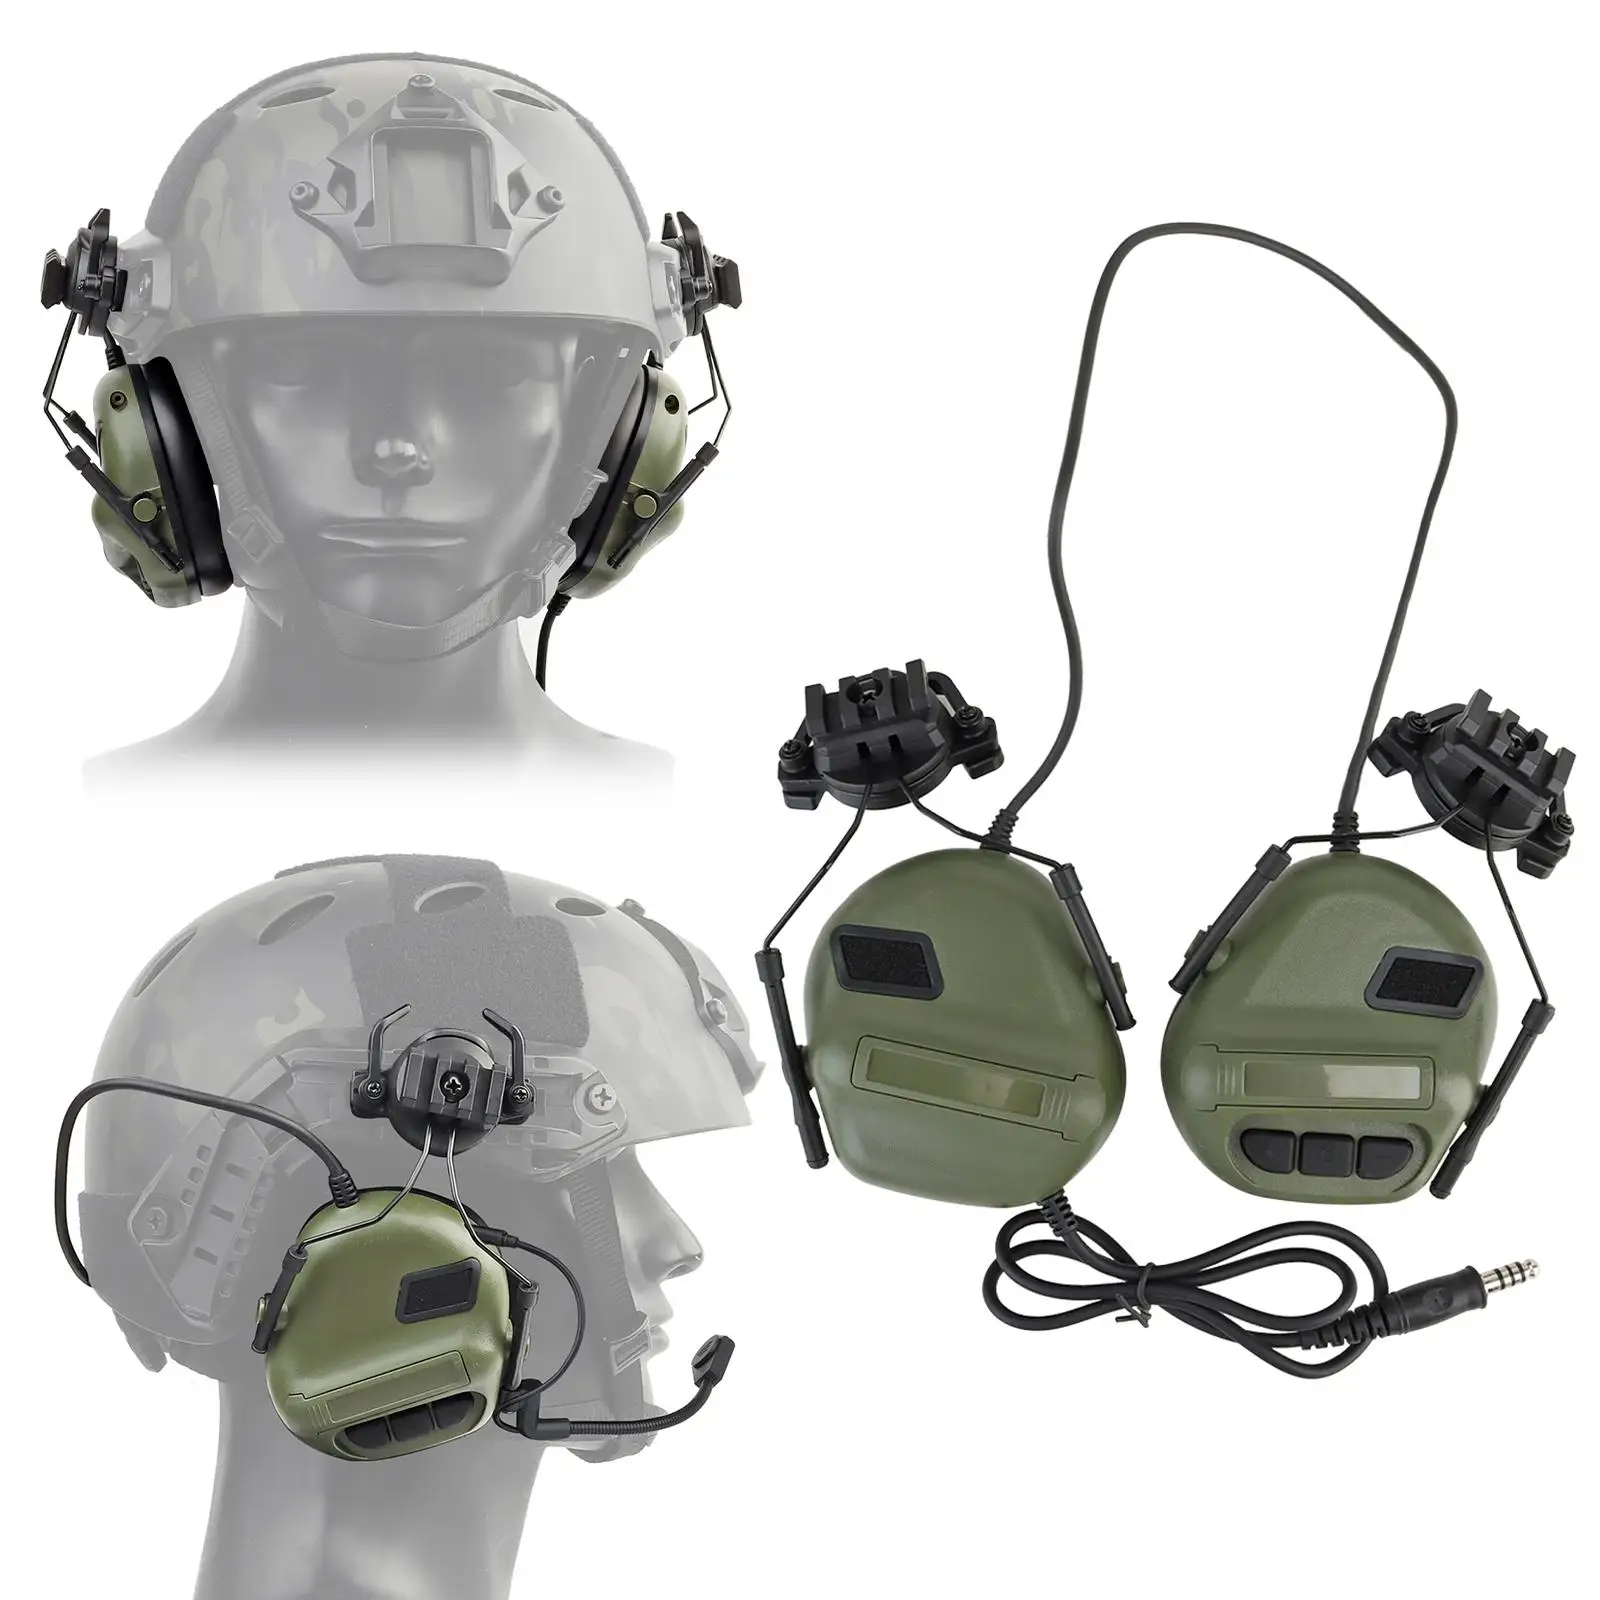 Foldable Ear Muffs Noise Cancelling Protective Headset Adjustable Nrr 21dB Ear Defender for Hunting Team Activities Mowing